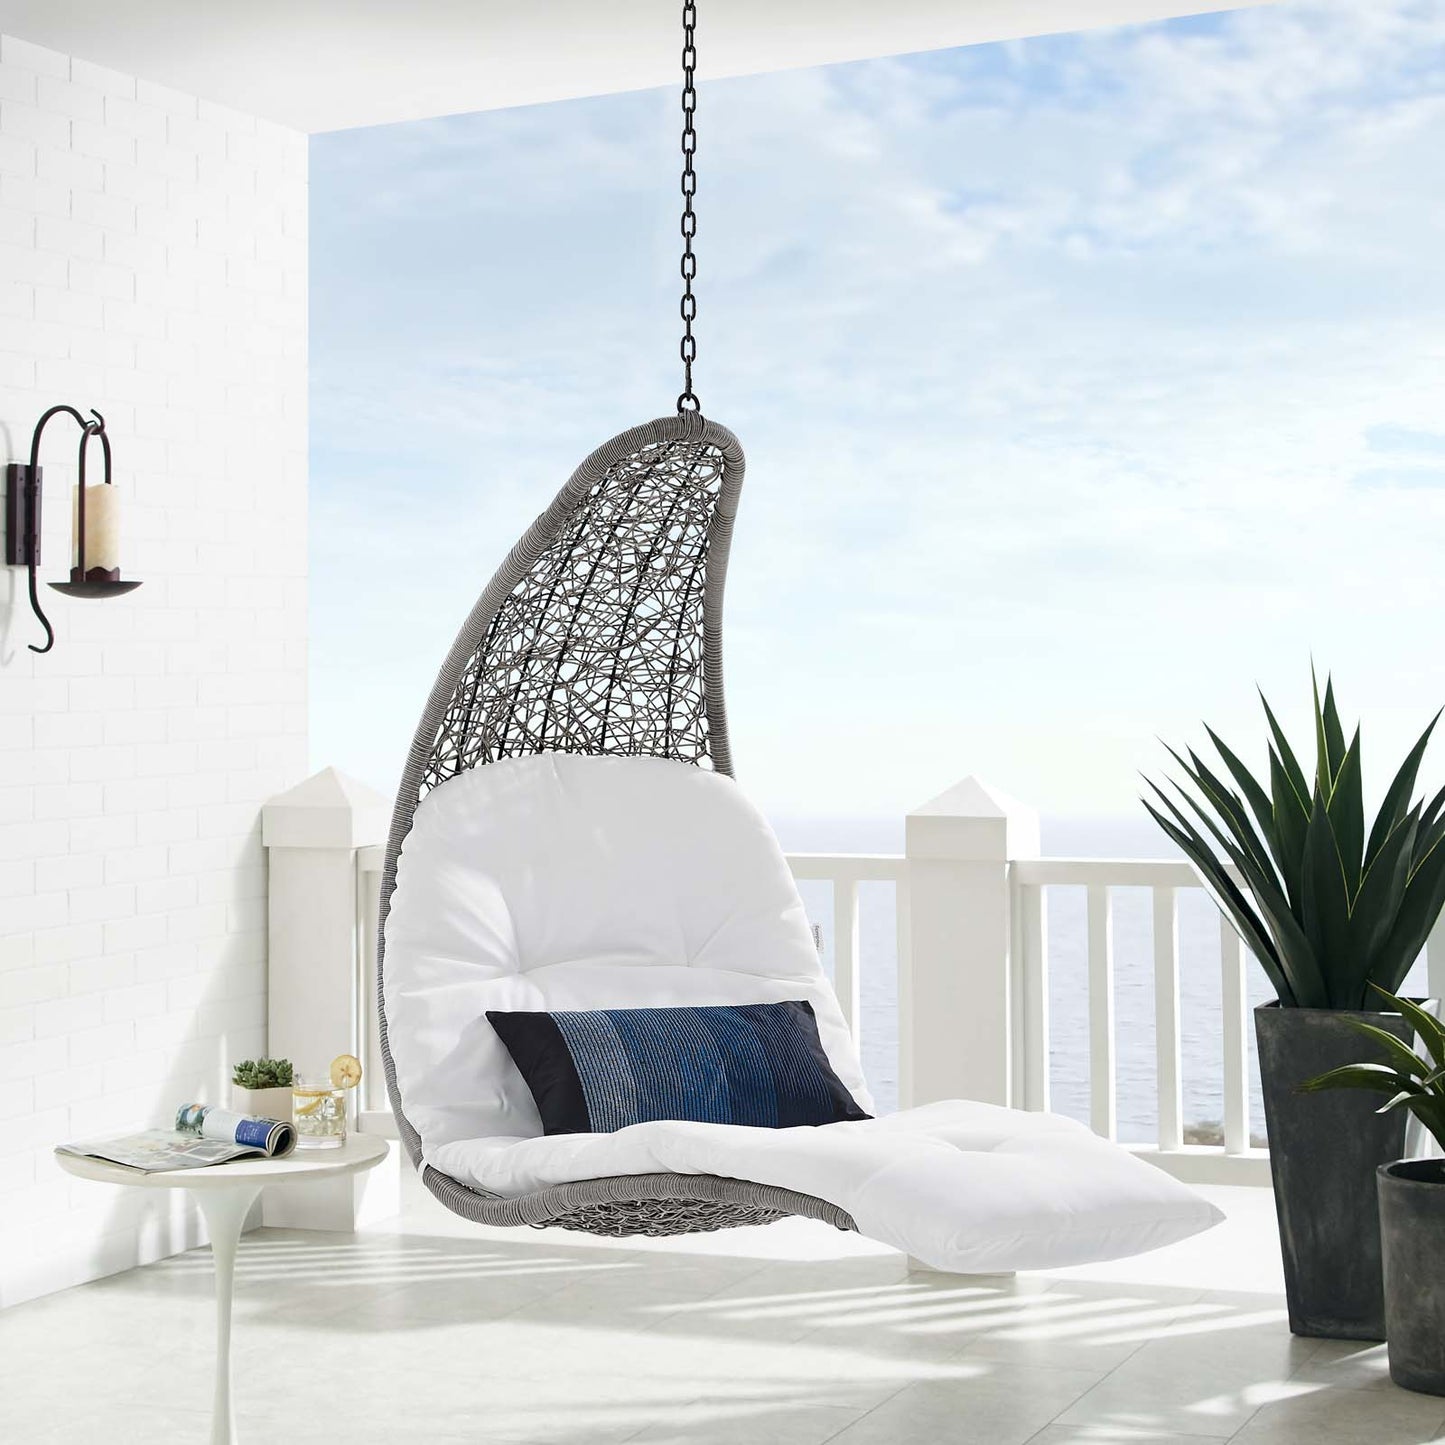 Landscape Hanging Chaise Lounge Outdoor Patio Swing Chair Light Gray White EEI-4589-LGR-WHI